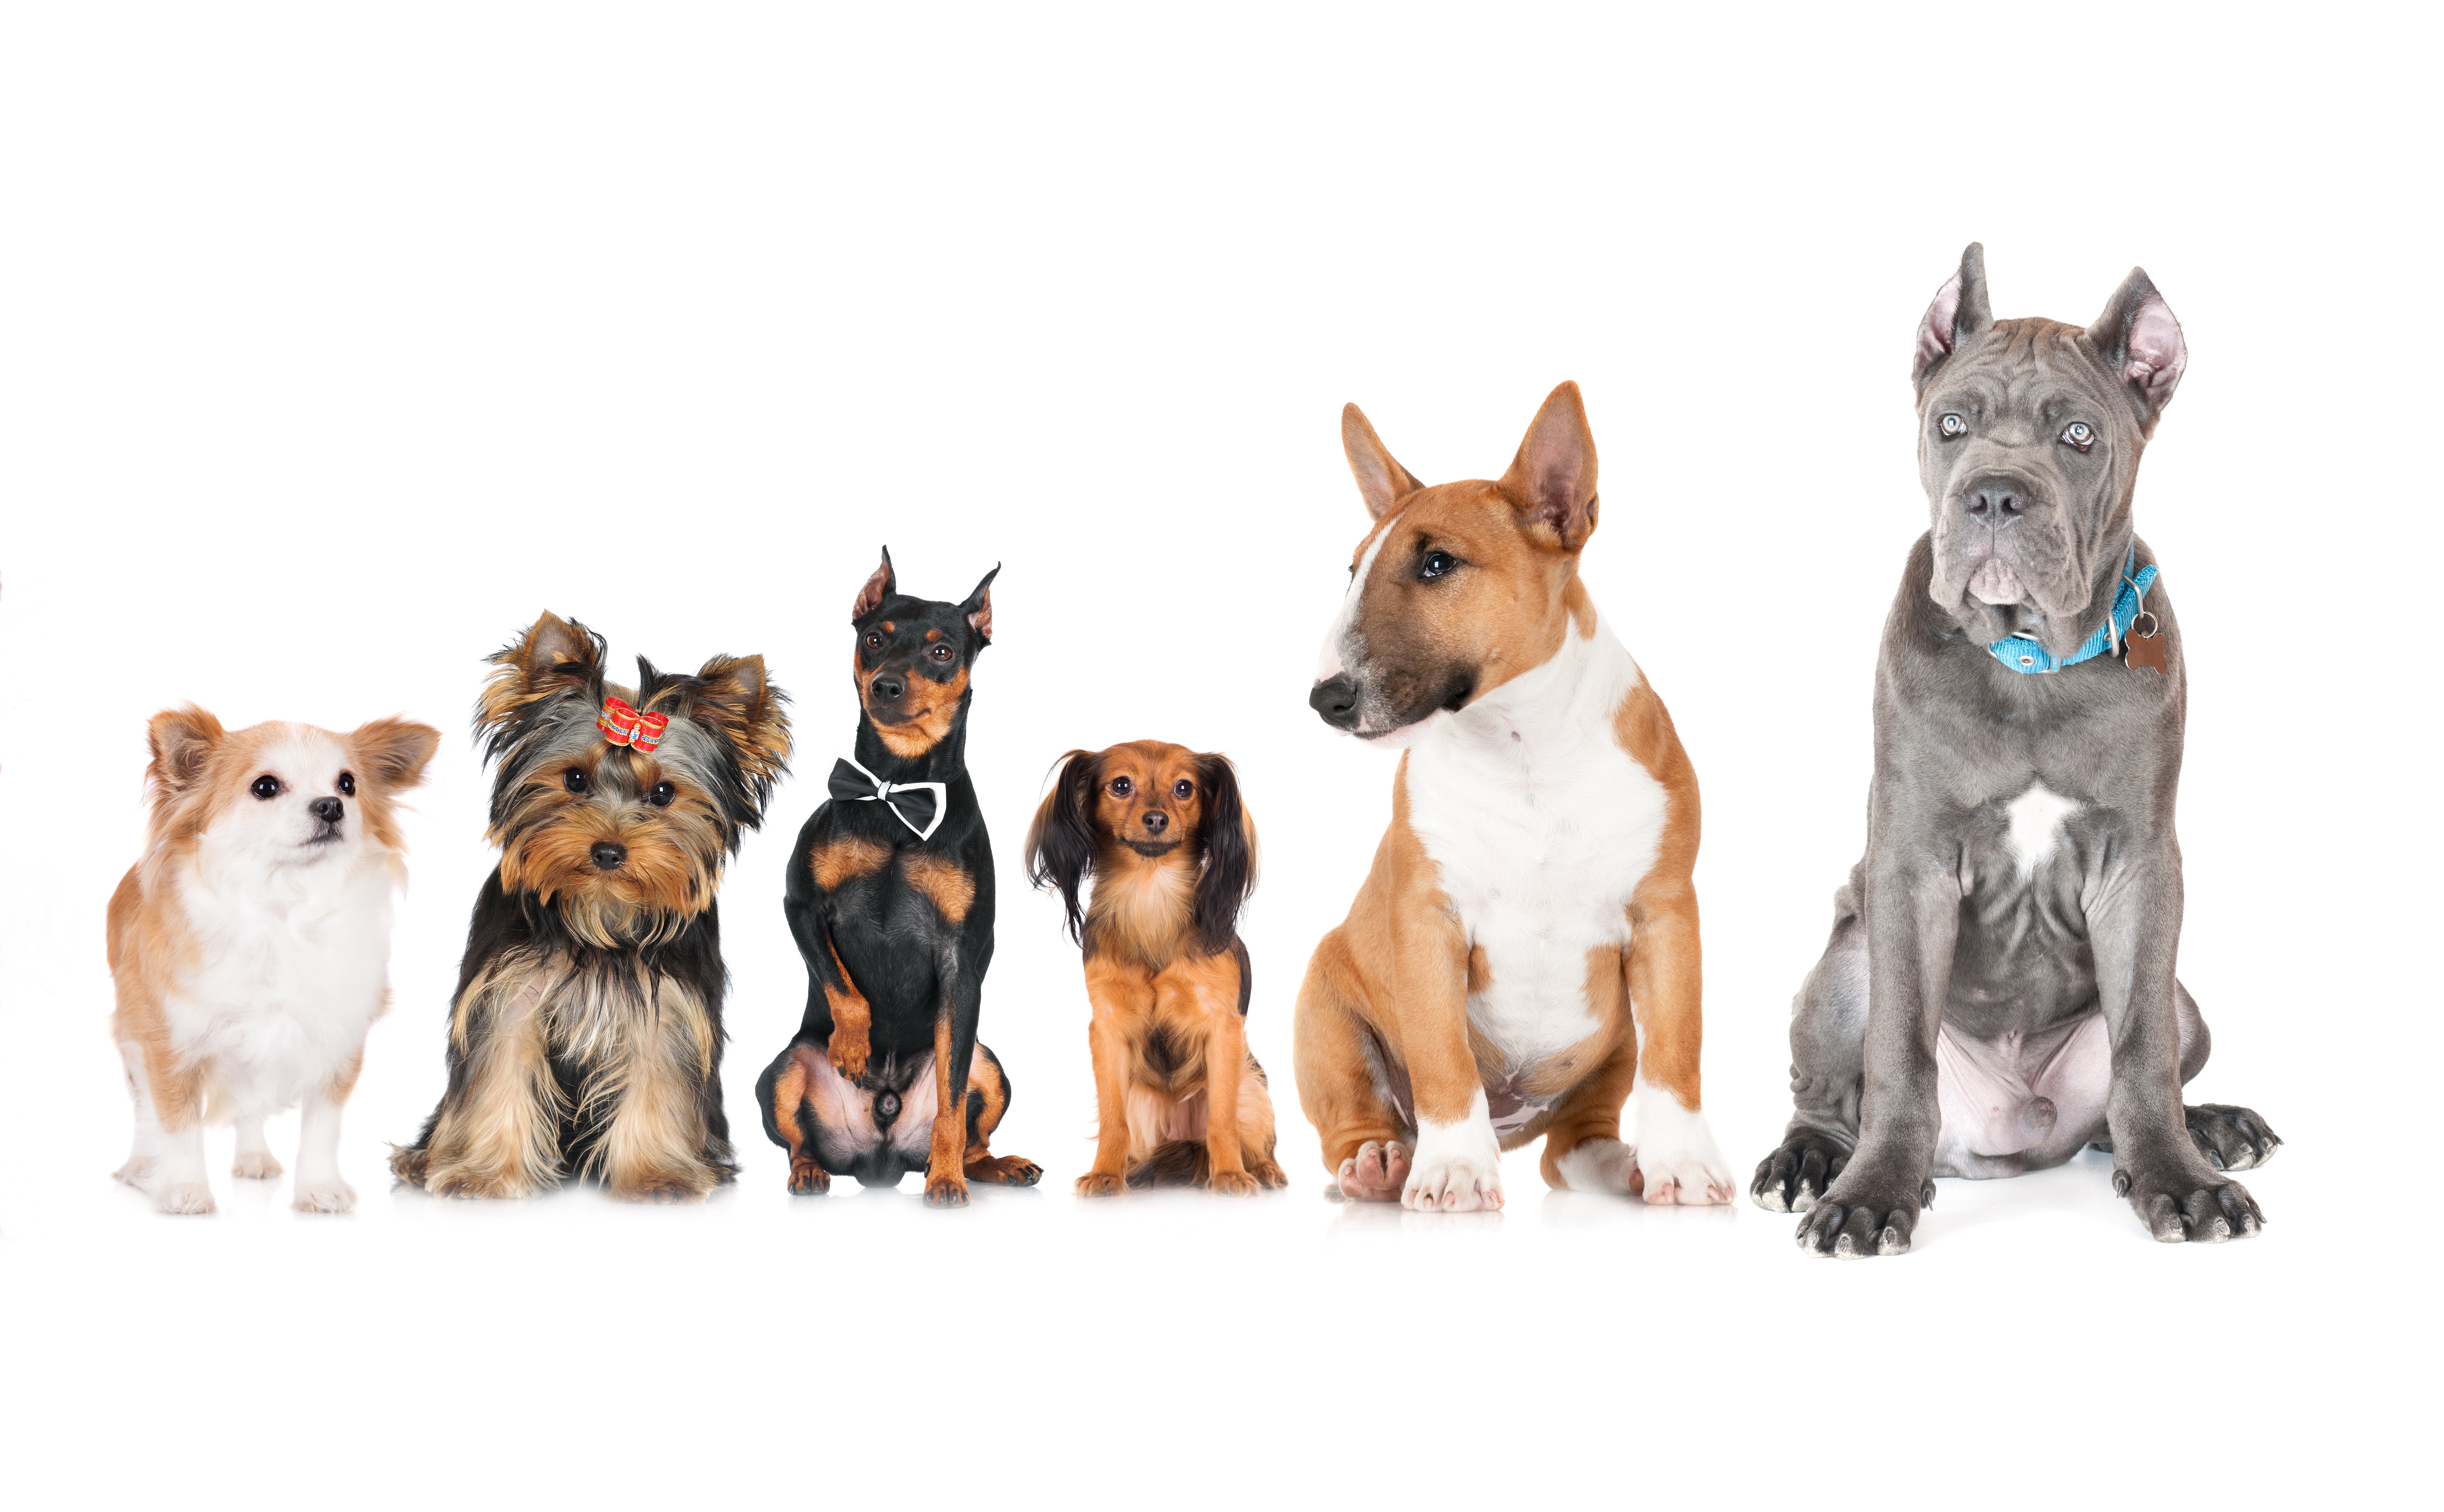 dogs, Cats, Russkiy, Toy, Doberman, Chihuahua, Bull, Terrier, Yorkshire Wallpaper